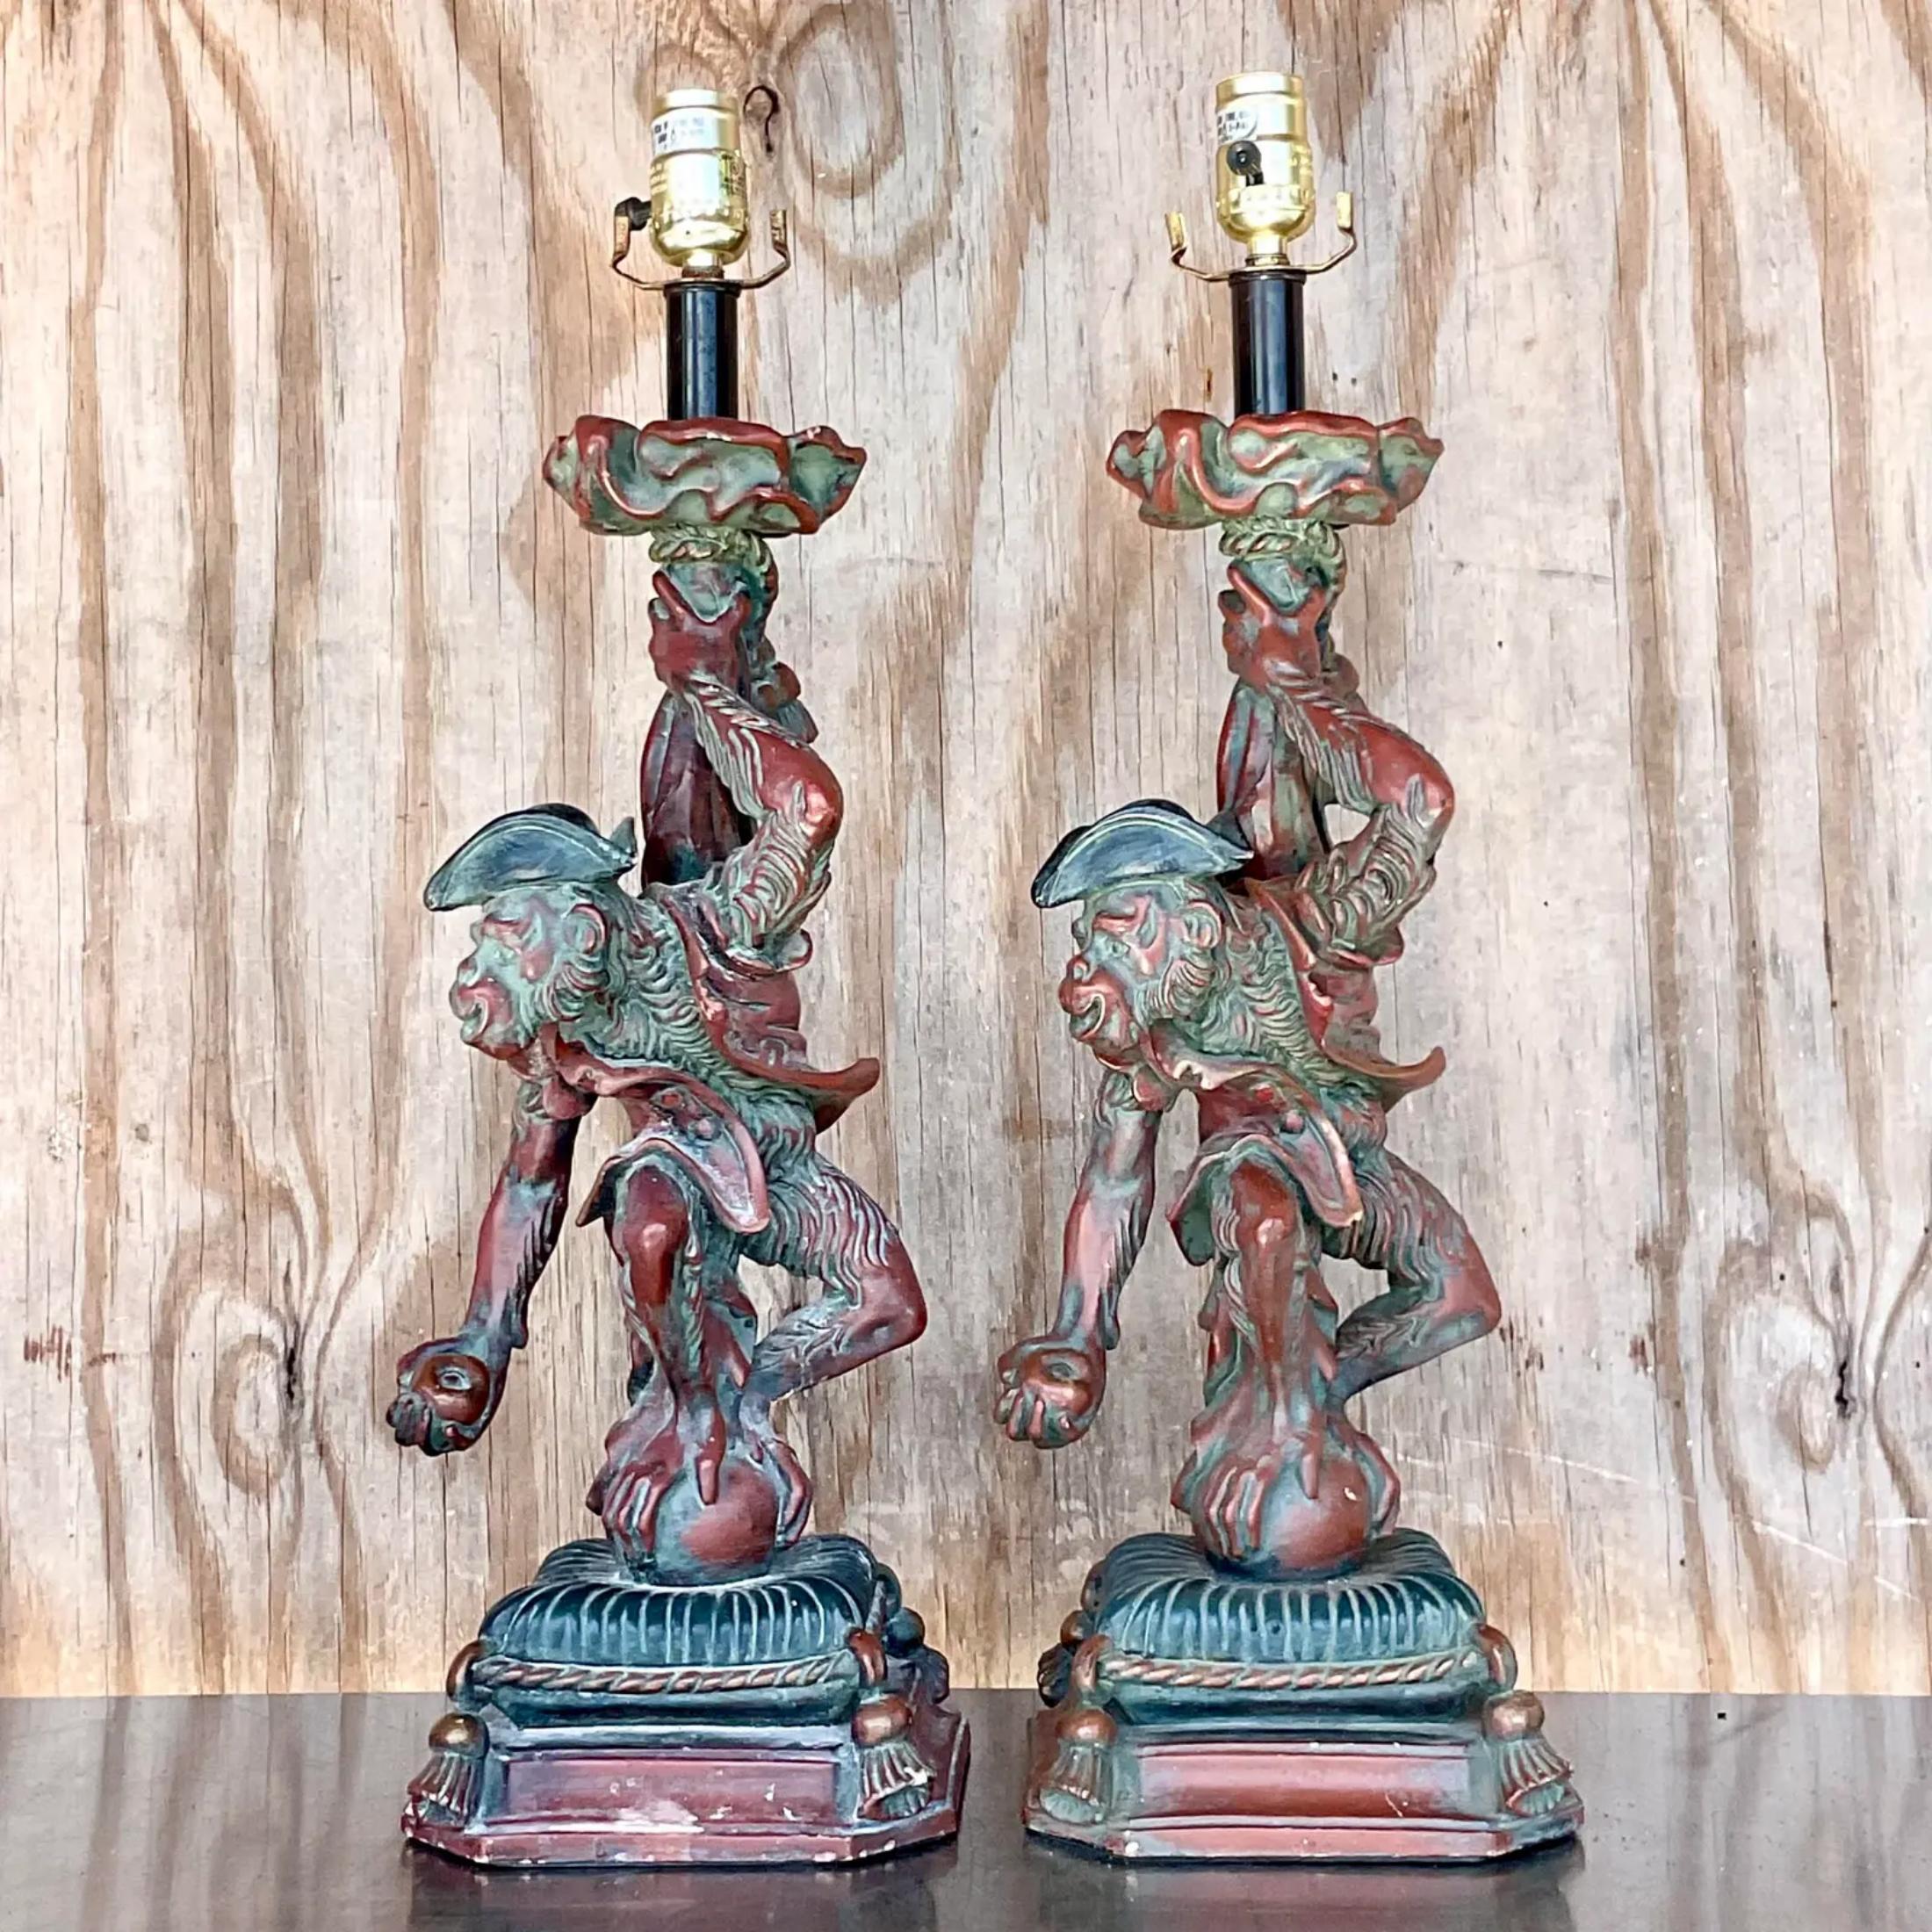 A fabulous pair of vintage Regency plaster table lamps. A chic pair of monkeys in period dress. Finished in a deep ruby color with a moss green wash. Acquired from a Palm Beach estate